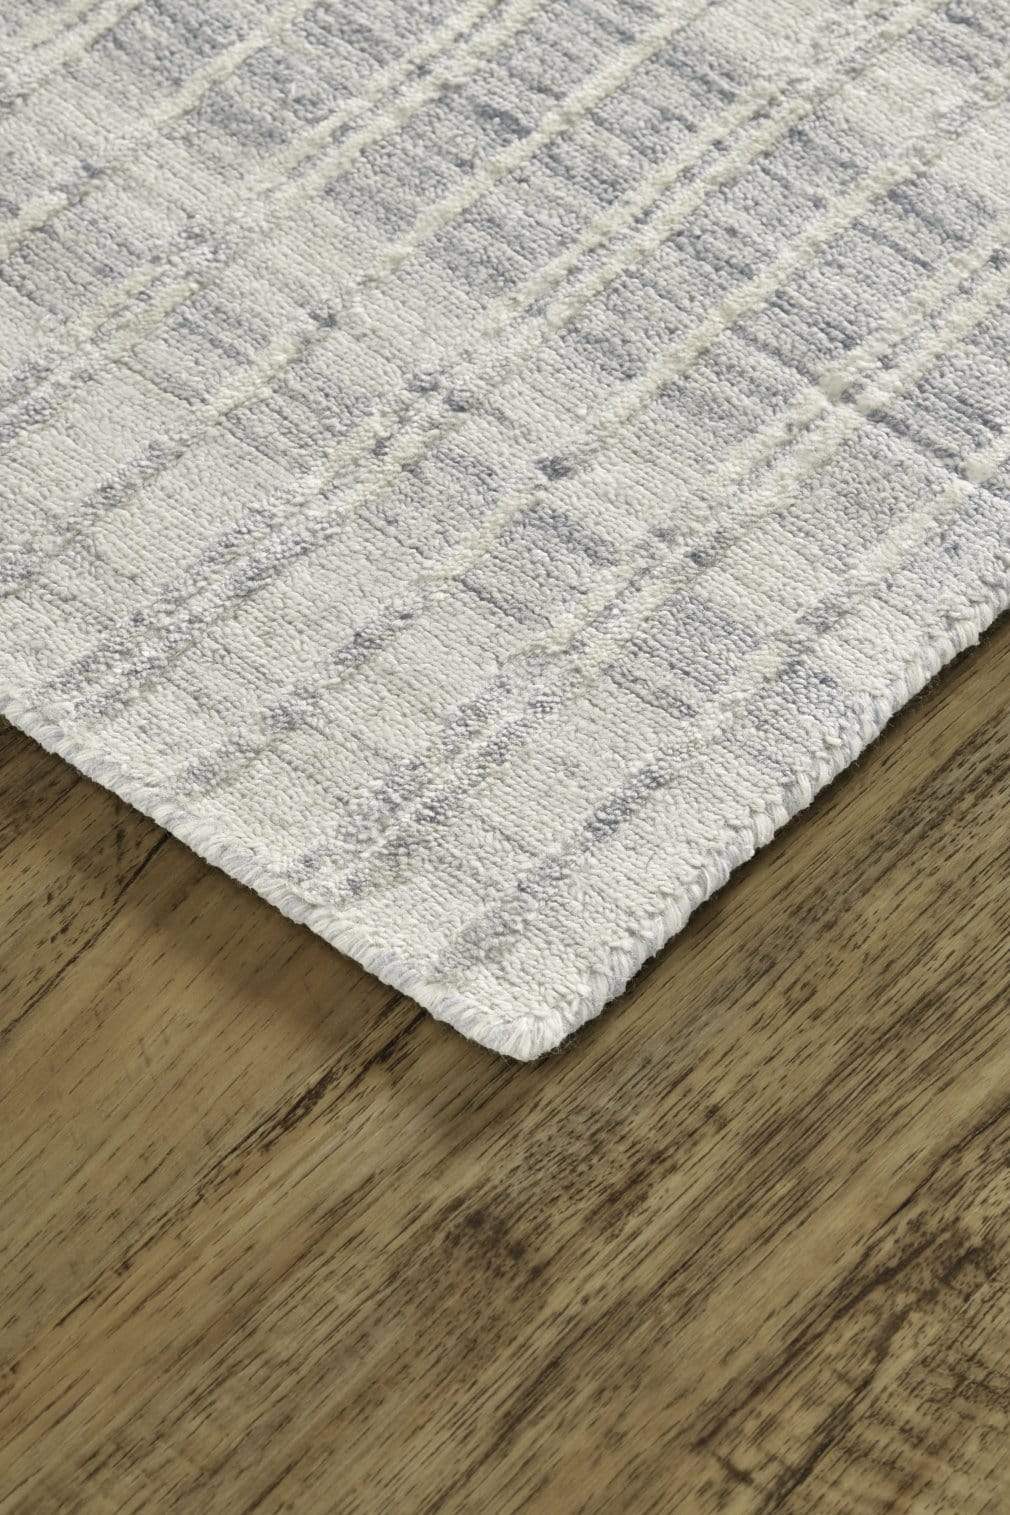 Feizy Feizy Odell Classic Handmade Rug - Available in 6 Sizes - Ivory & Spa Blue